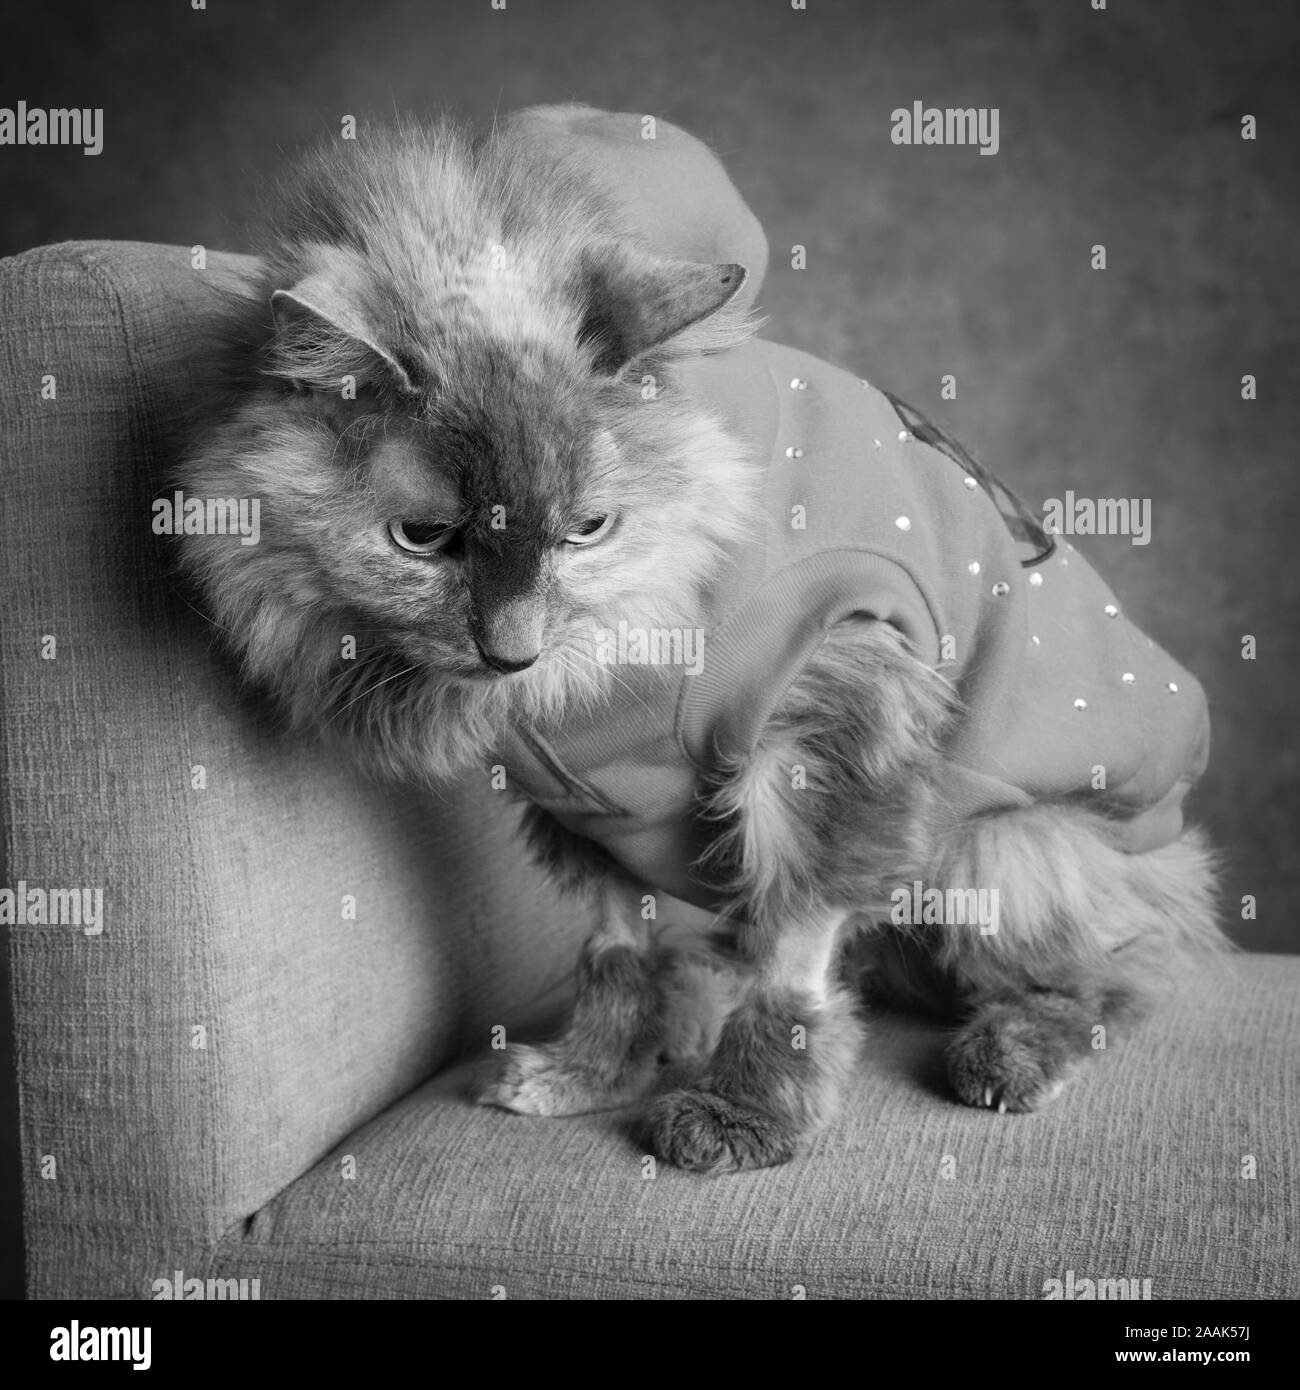 Studio shot of long haired cat wearing vest sitting on chair Stock Photo